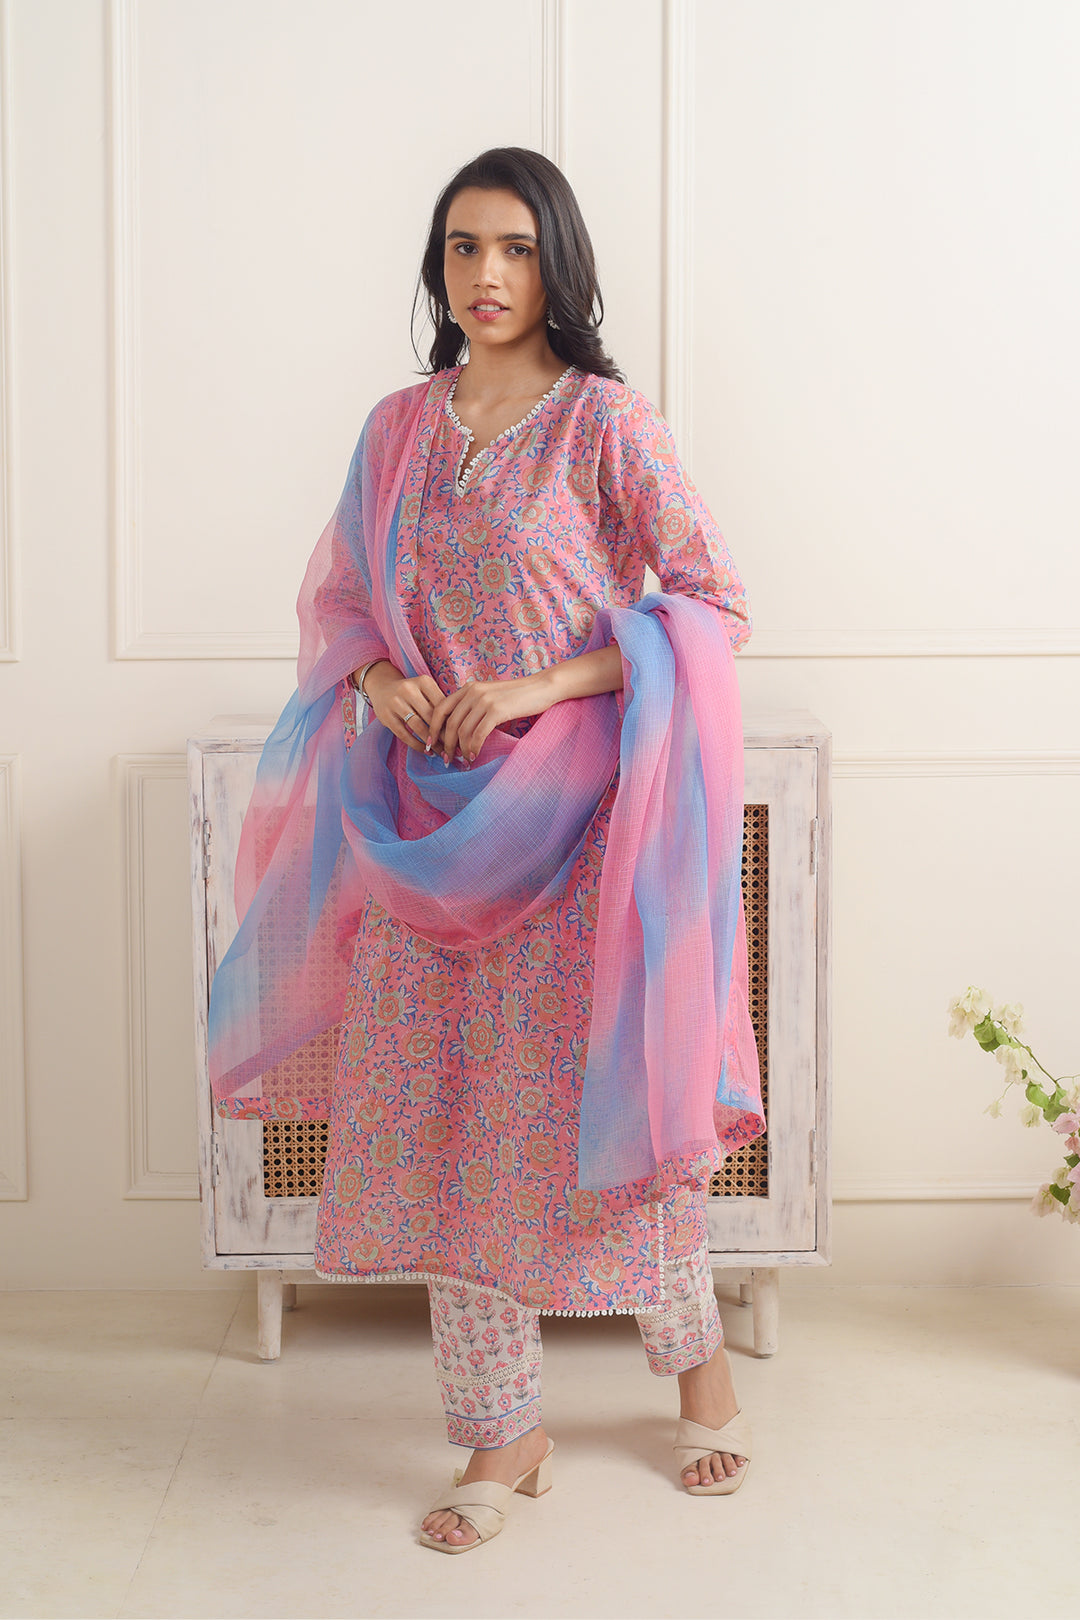 Gulbano Pink Jaal Suit set of 3